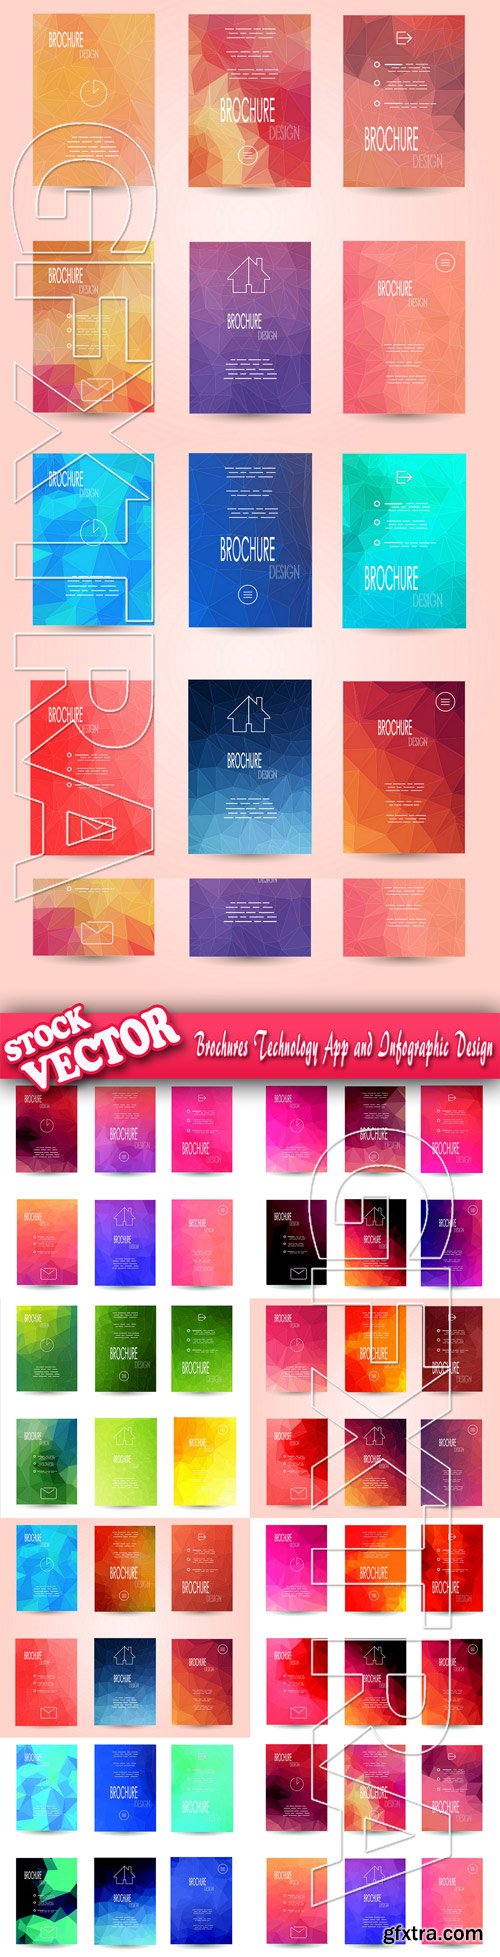 Stock Vector - Brochures Technology App and Infographic Design